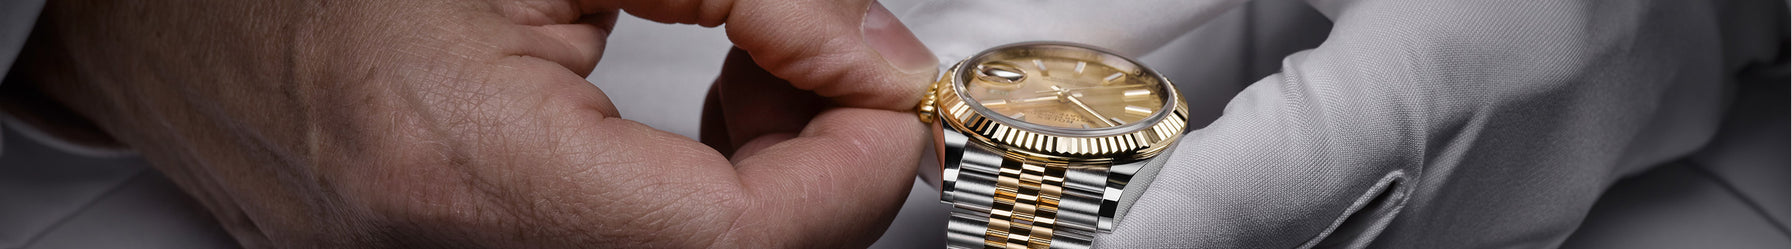 A man with one white glove on is adjusting the time on a Rolex as part of its service